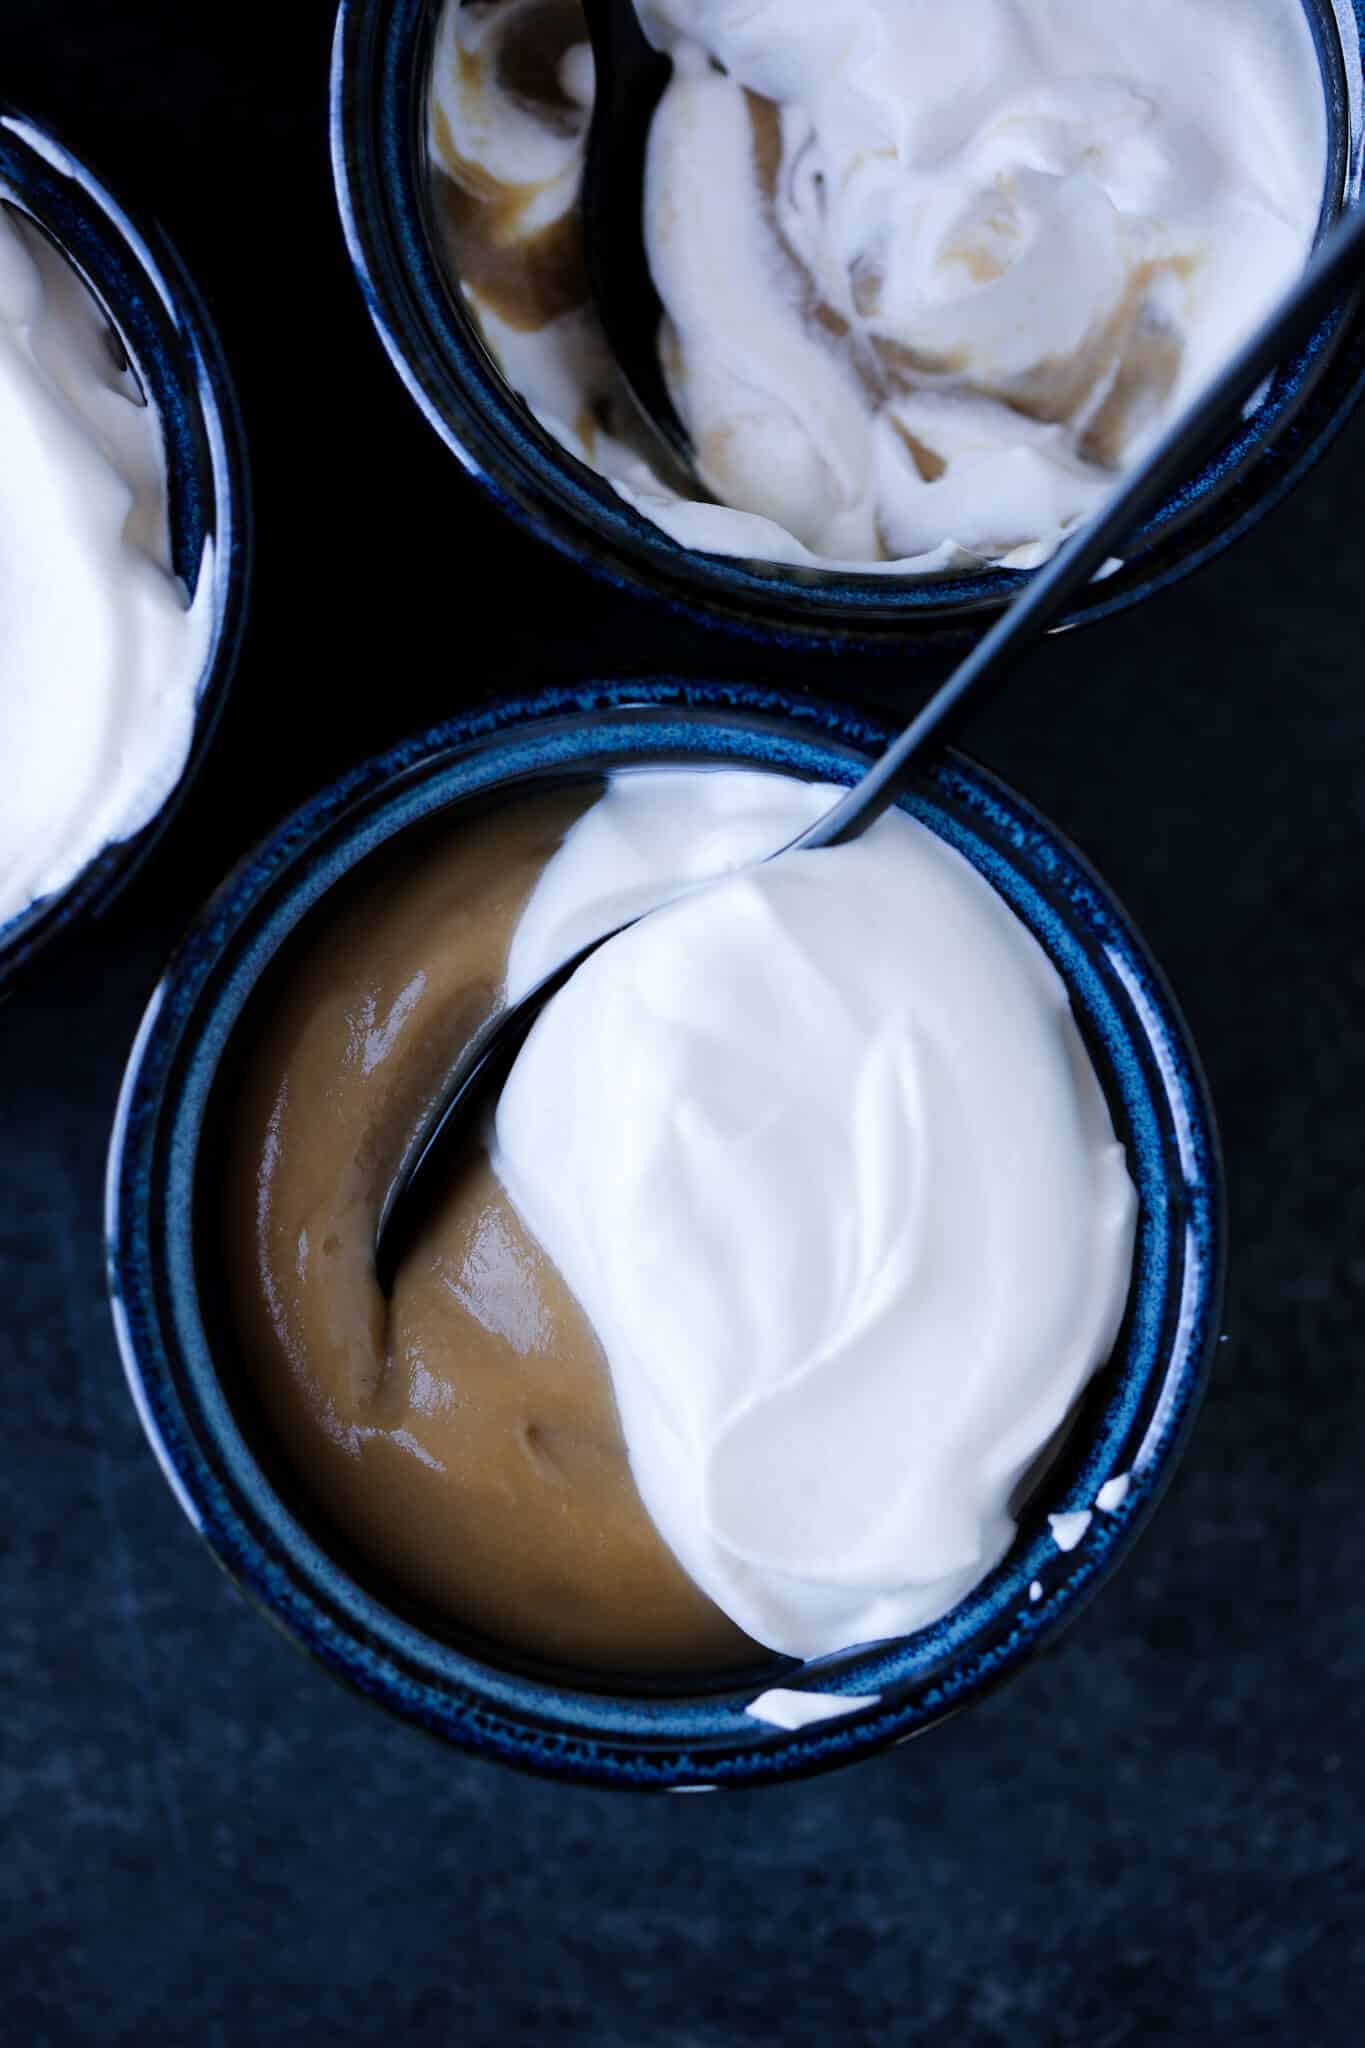 Butterscotch pudding in serving bowls against a dark background.